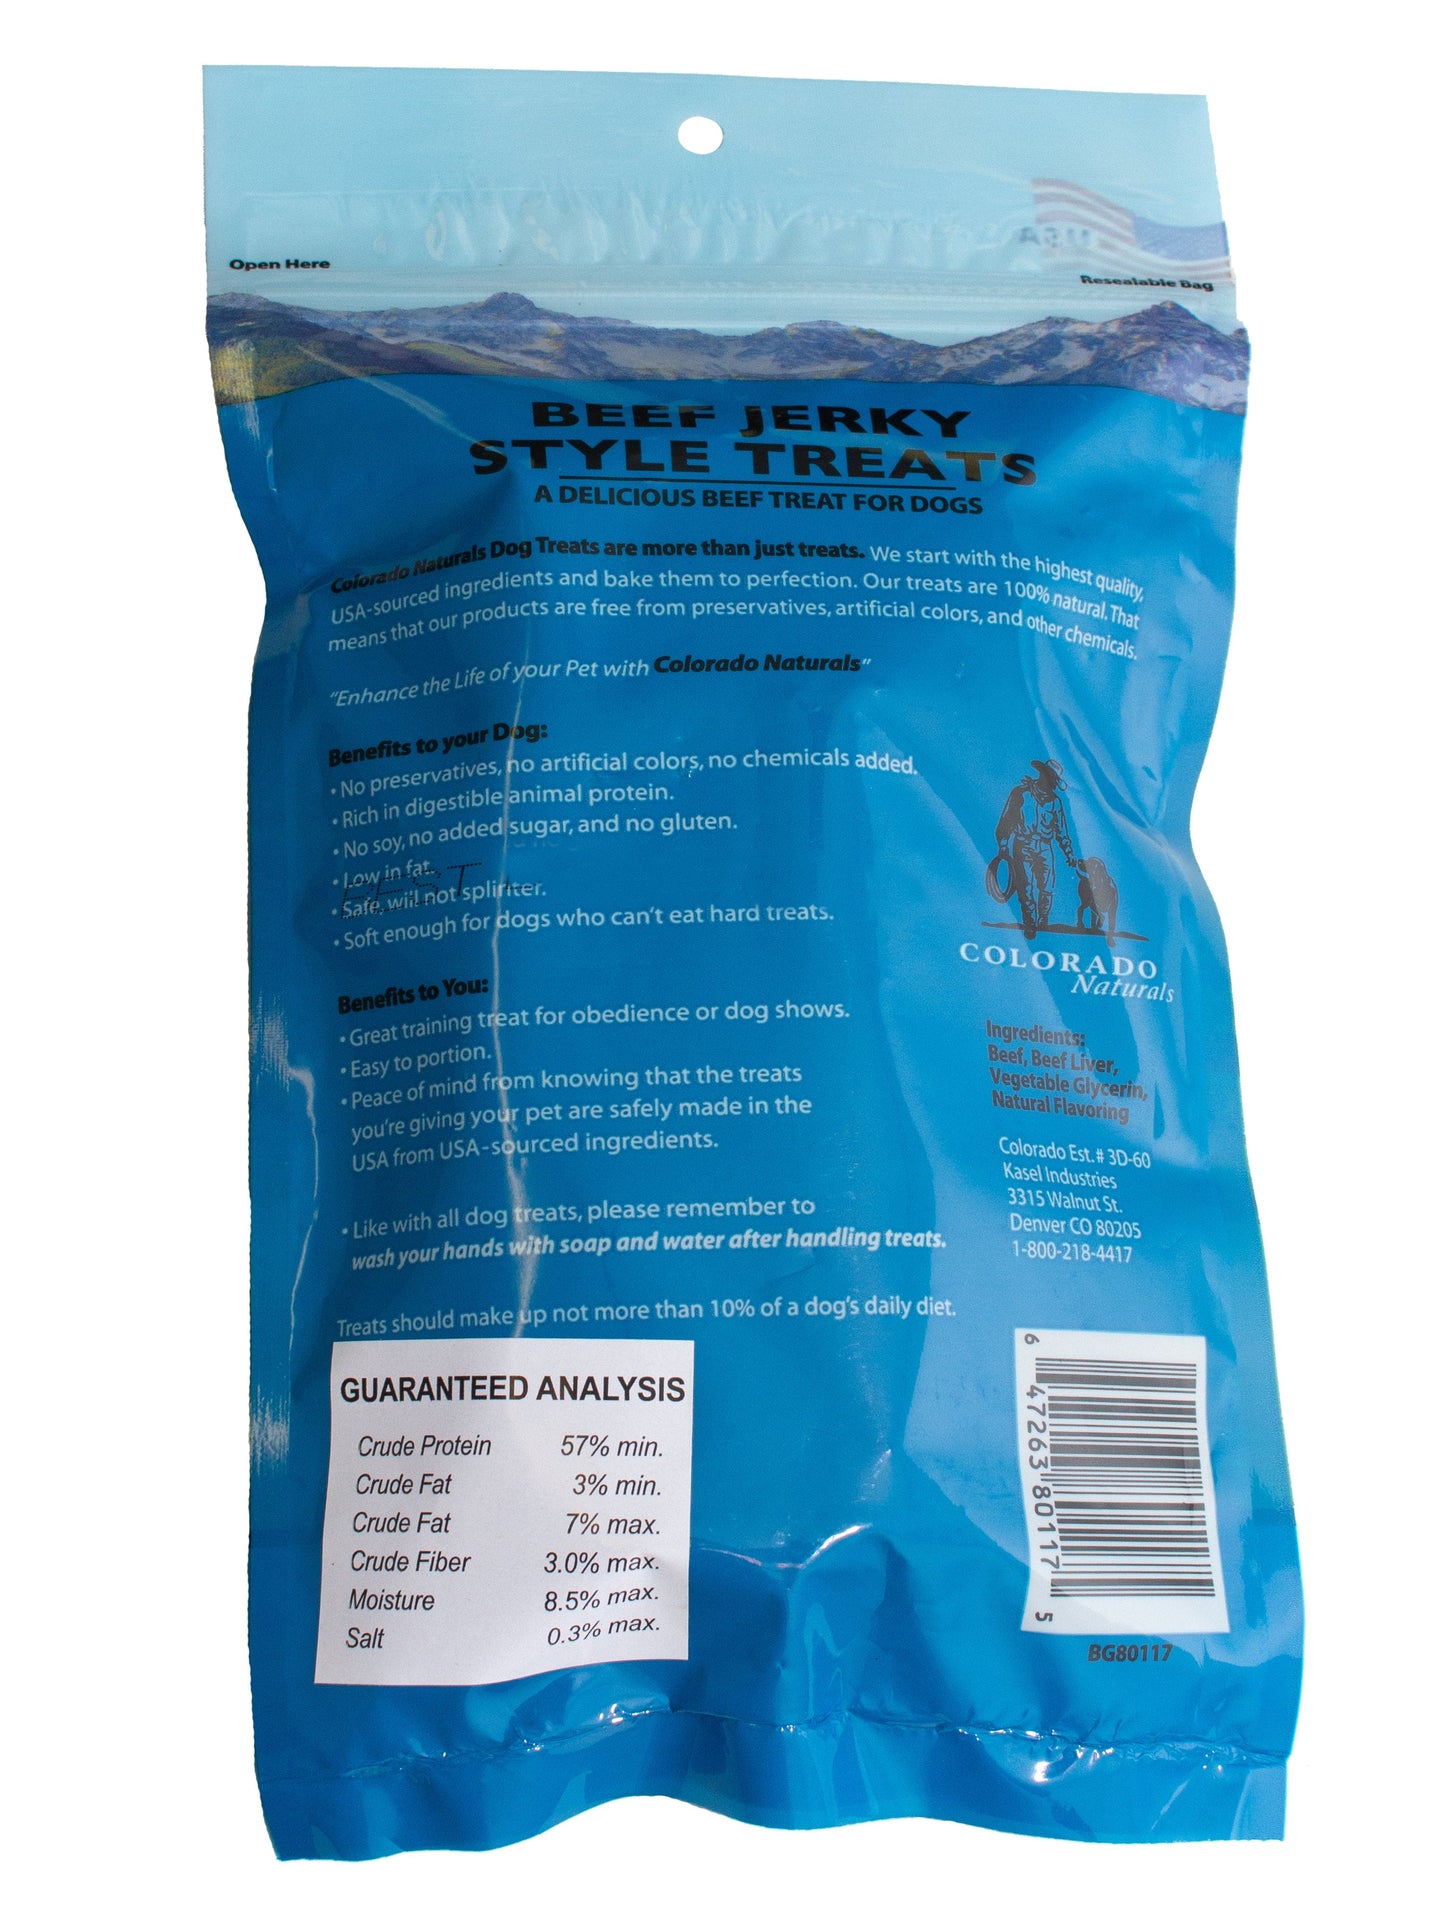 A photo of the back of the best 4 oz Beef Jerky Dog Treats from Colorado Pet Treats by Colorado Naturals. Colorado Pet Treats - All-Natural, All-American Dog Jerky, Jerky Chips, and Bones - Treat your furry friend to our delicious and healthy pet treats made with only the finest ingredients sourced in the USA. Delicious and chewy all-American dog jerky made with natural ingredients sourced in Colorado.